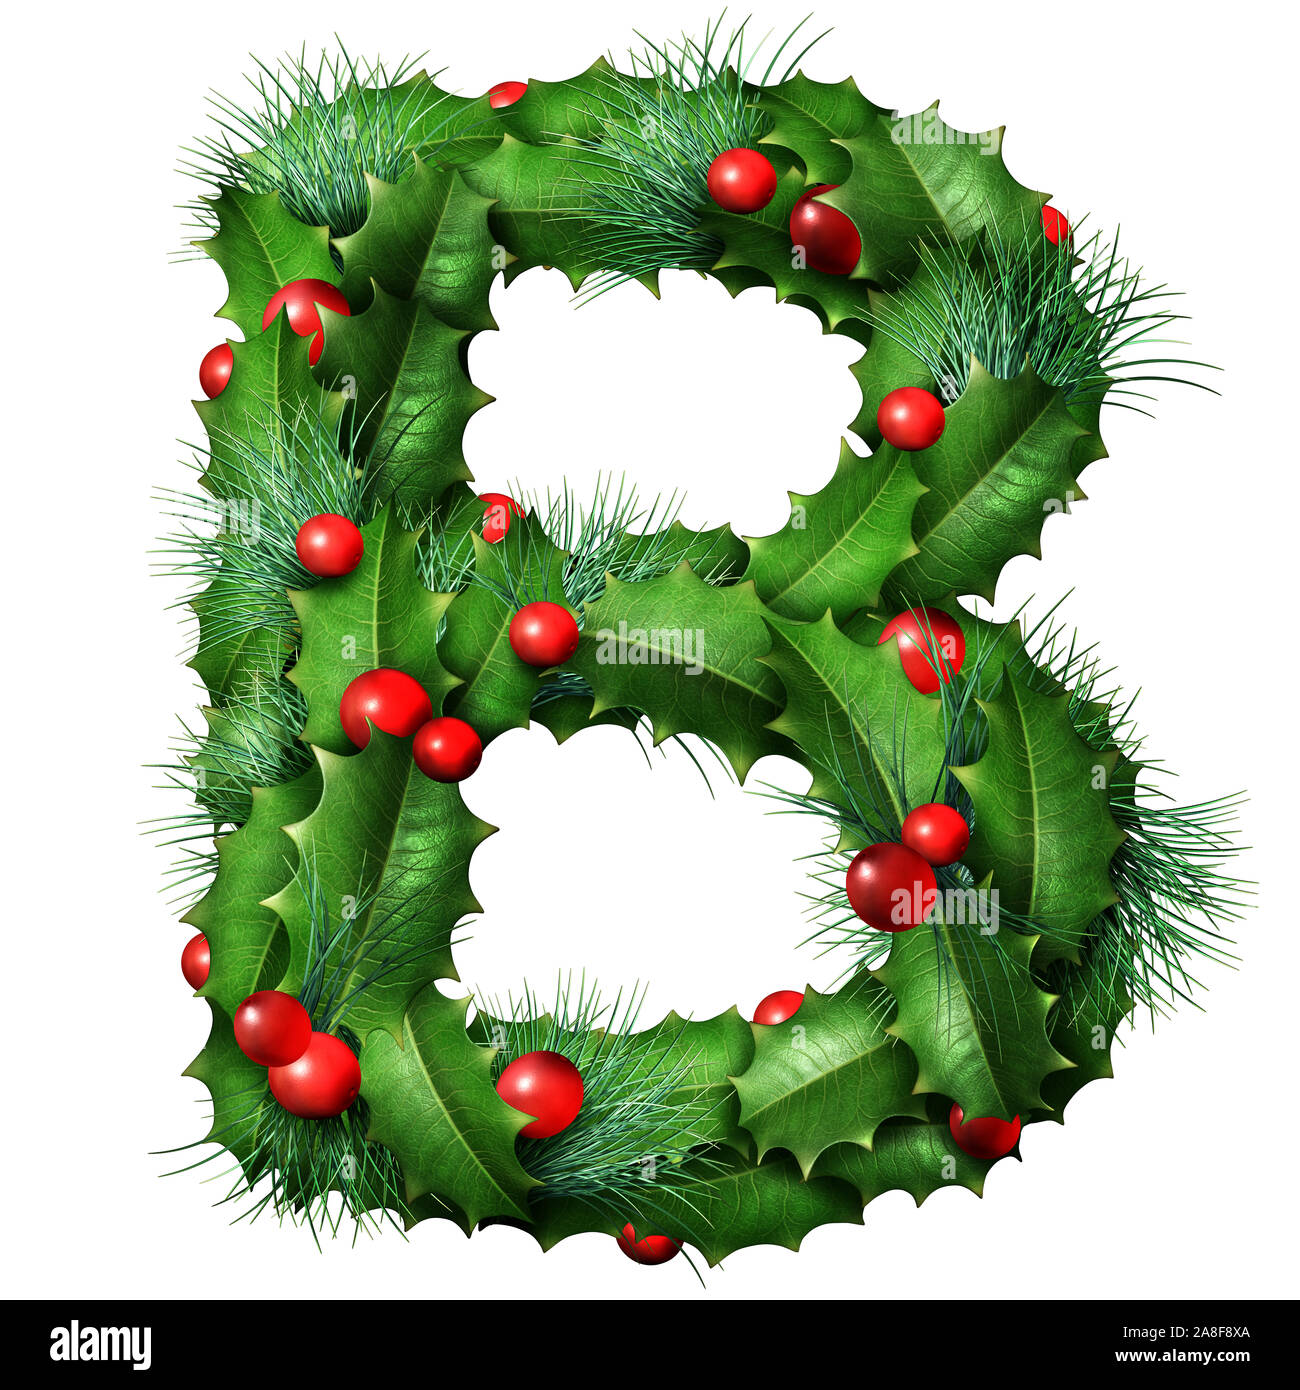 https://c8.alamy.com/comp/2A8F8XA/holiday-font-letter-b-as-a-festive-winter-season-decorated-garland-as-a-christmas-or-new-year-seasonal-alphabet-lettering-isolated-on-a-white-2A8F8XA.jpg